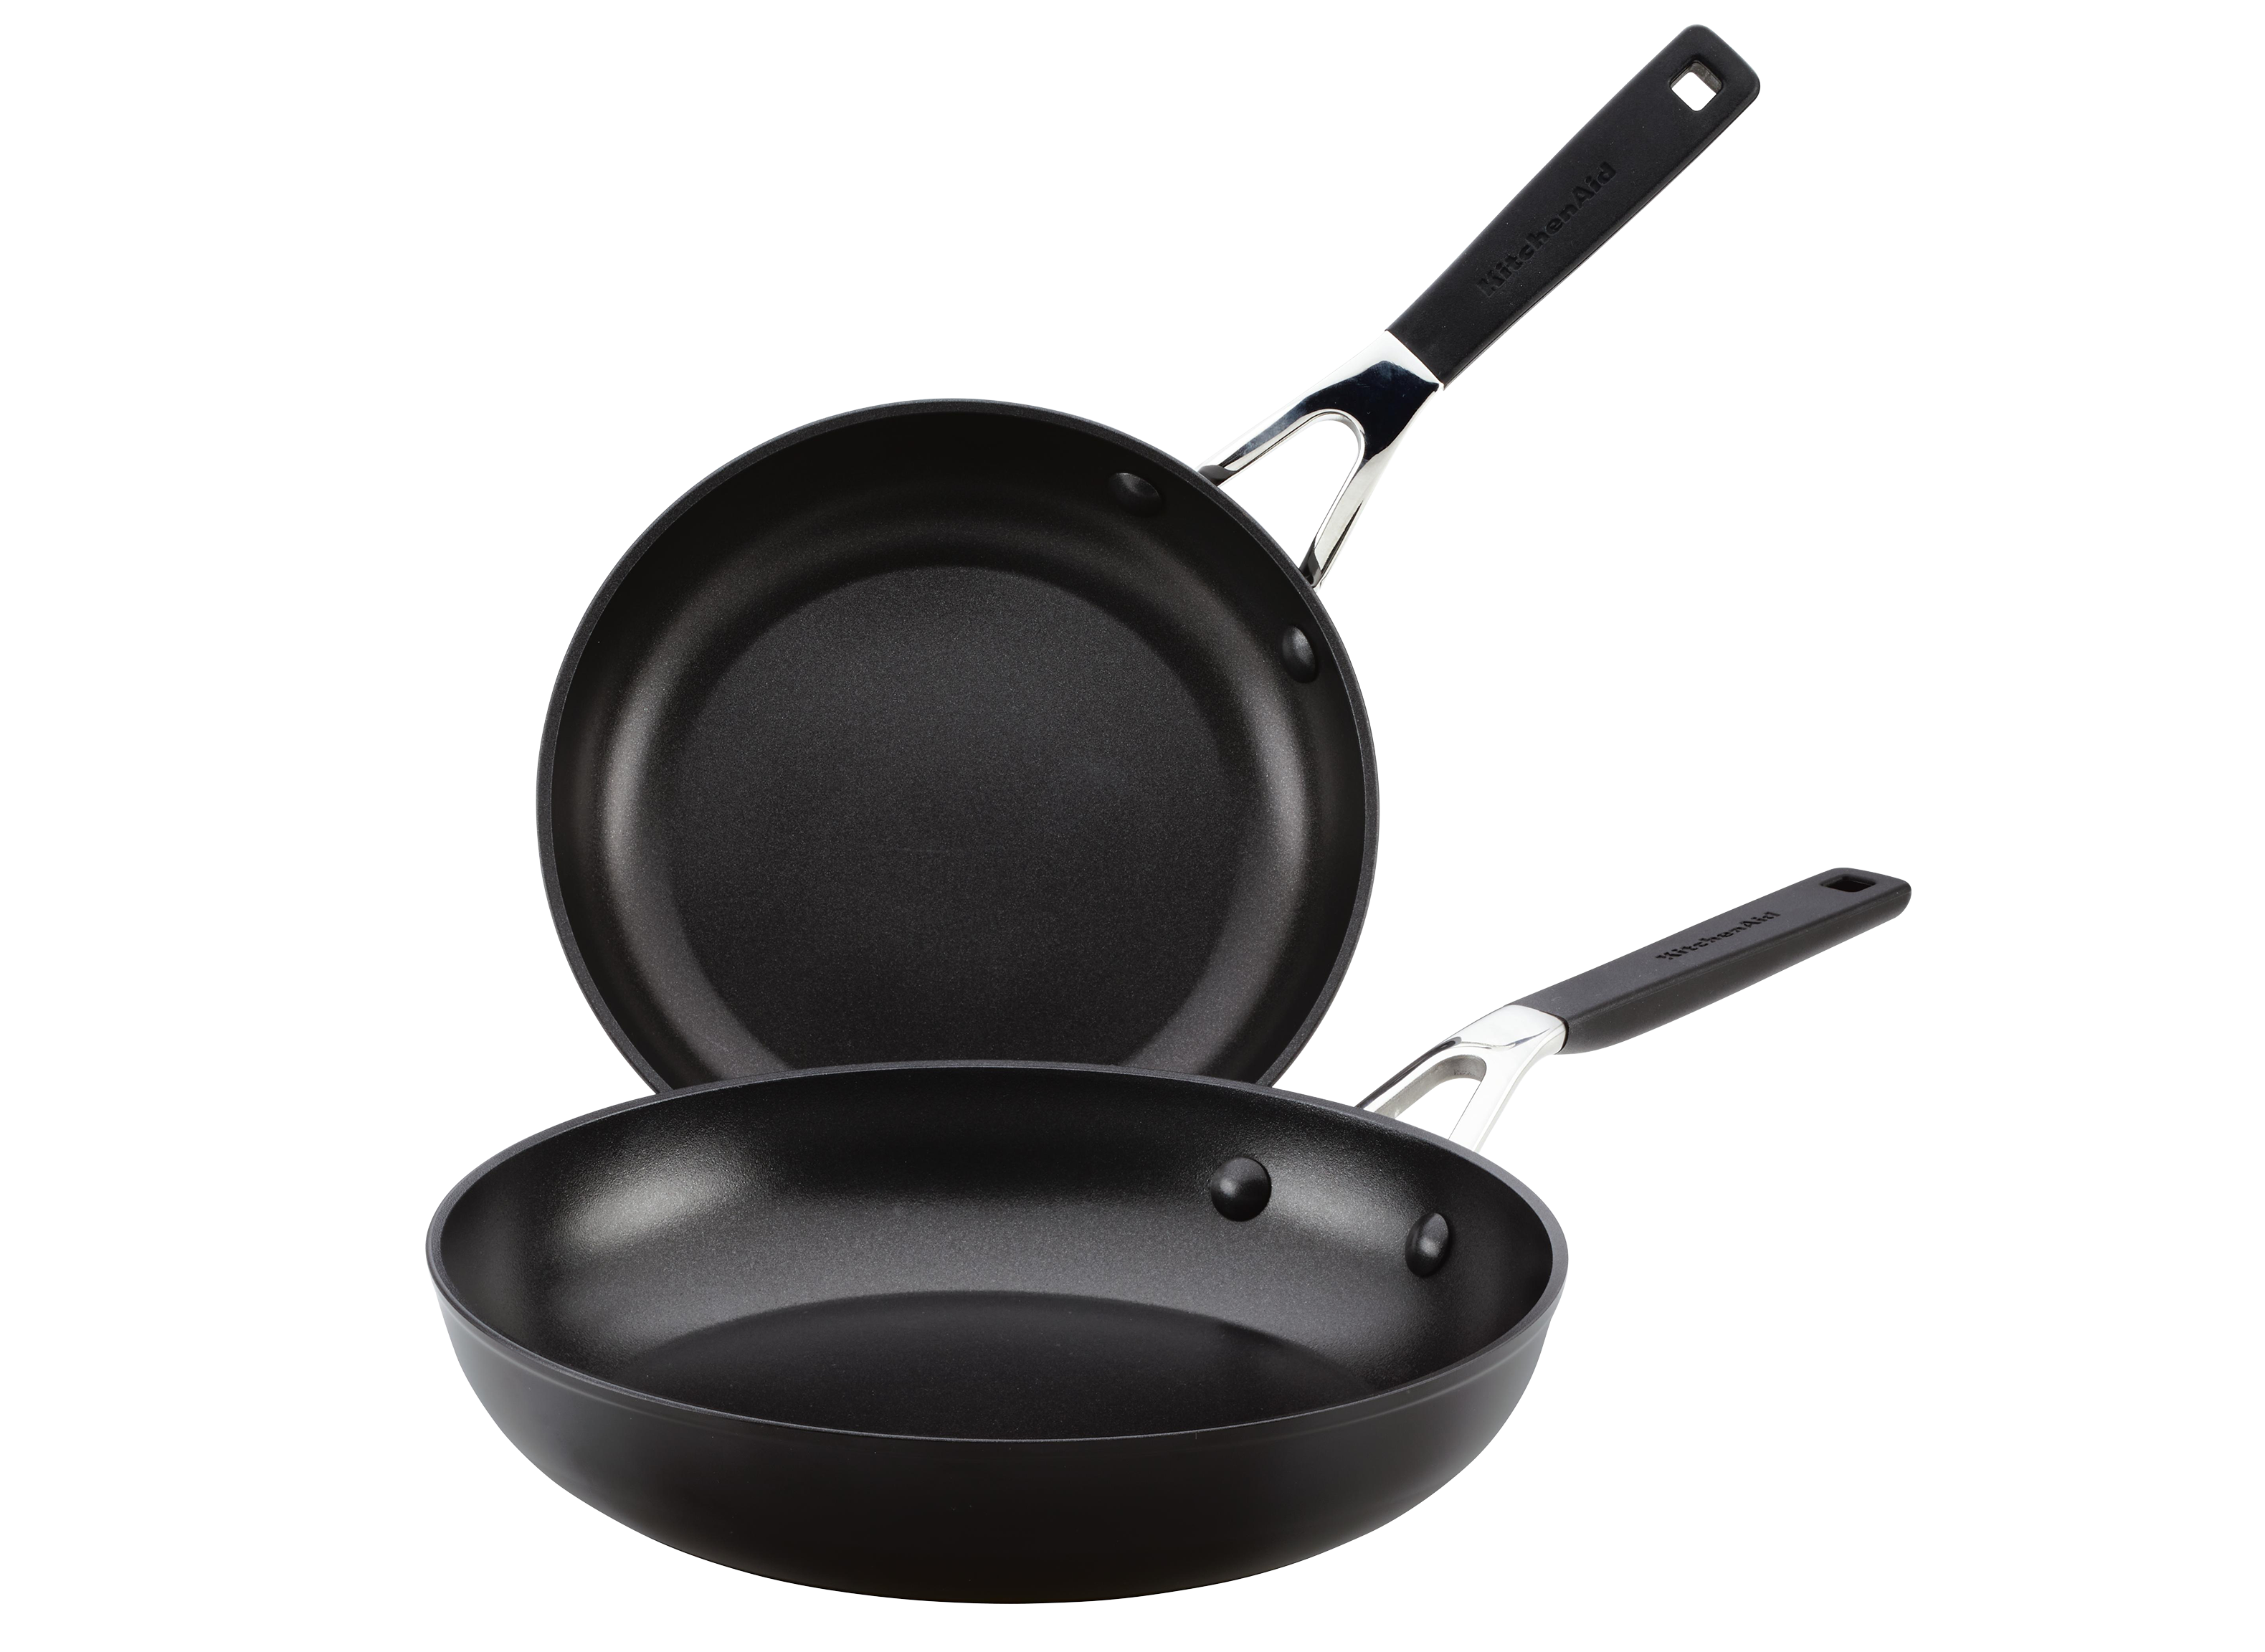 Is KitchenAid a good brand for frying pans? : r/Cooking